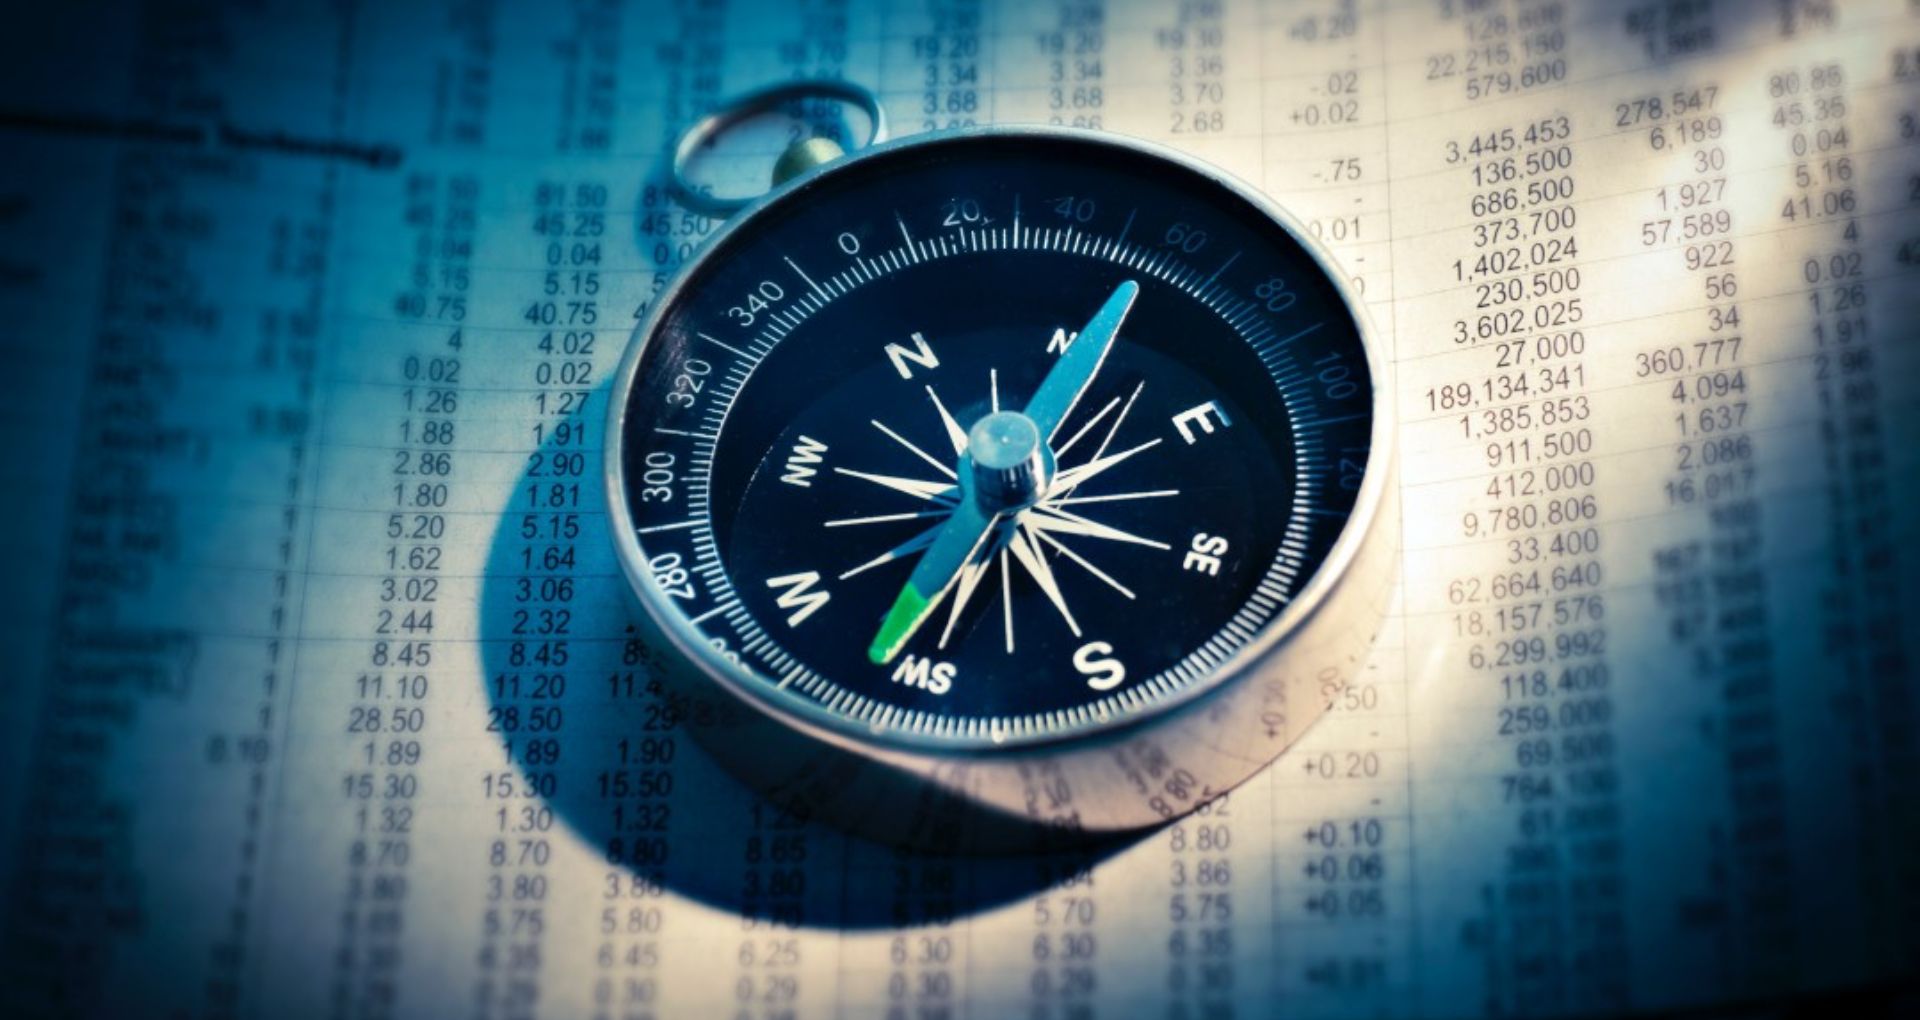 Picture of a compass under spotlight on top of a paper with lots of numbers in rows and columns.